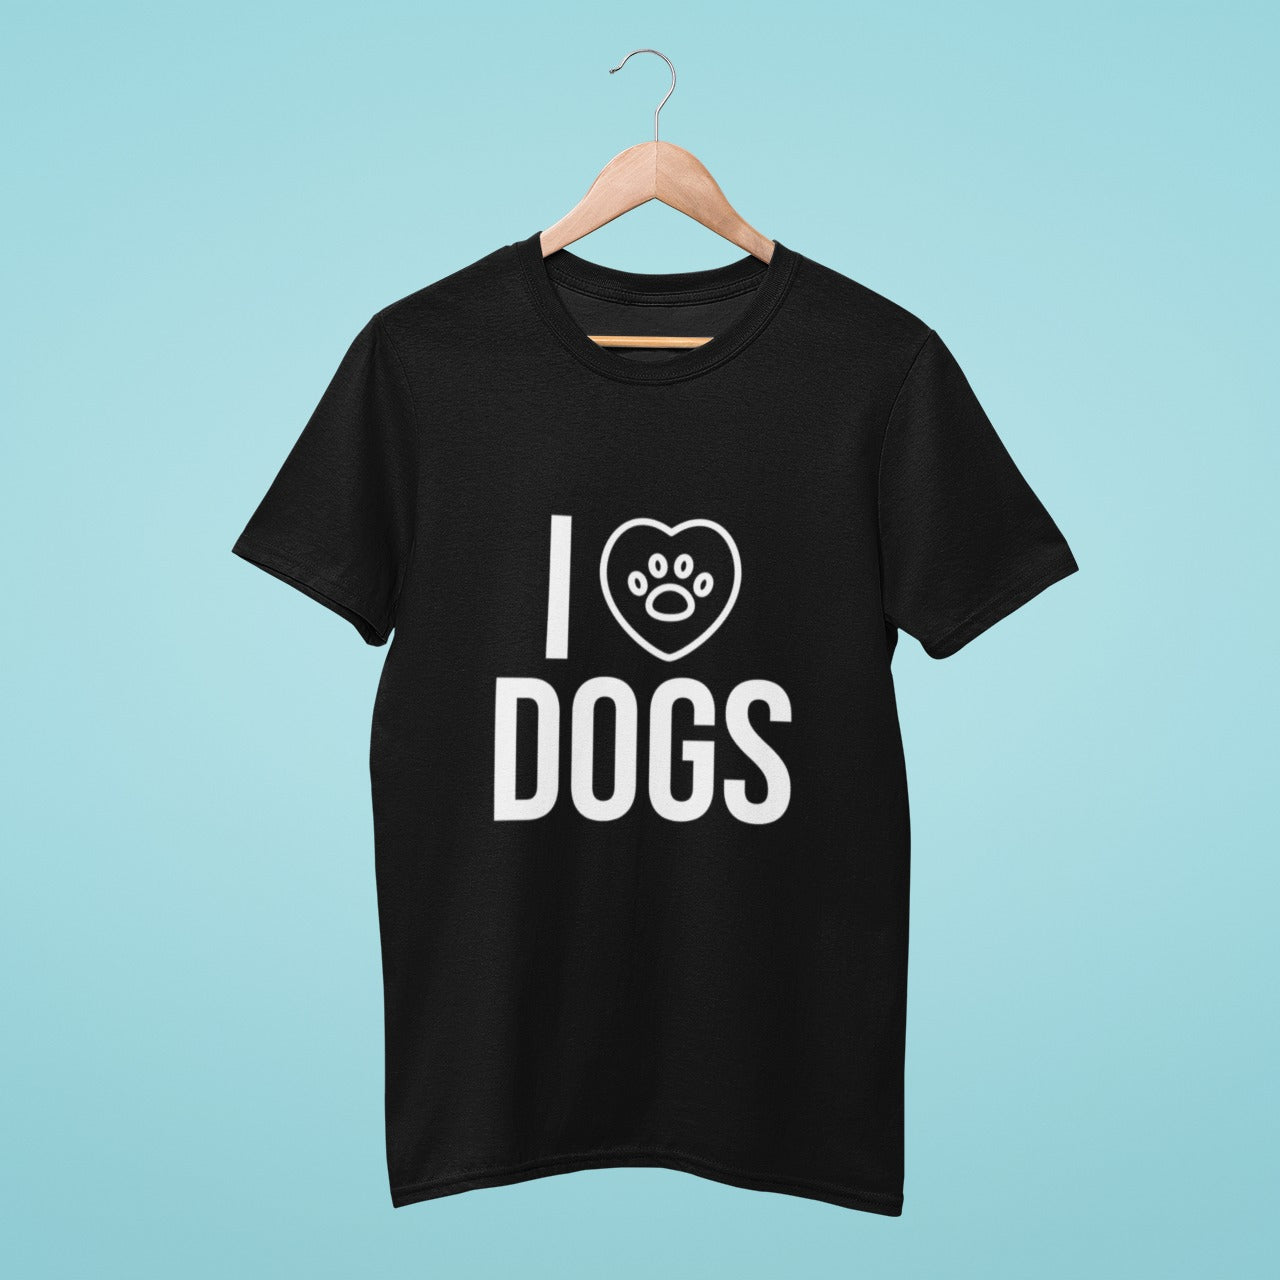 This black t-shirt is perfect for dog lovers! Featuring the message "I ❤️ dogs" with a heart symbol in place of the word "love" and a paw print inside the heart, this shirt shows off your affection for your furry best friends. Made from high-quality material, it's both comfortable and durable, making it the perfect addition to any dog lover's wardrobe.